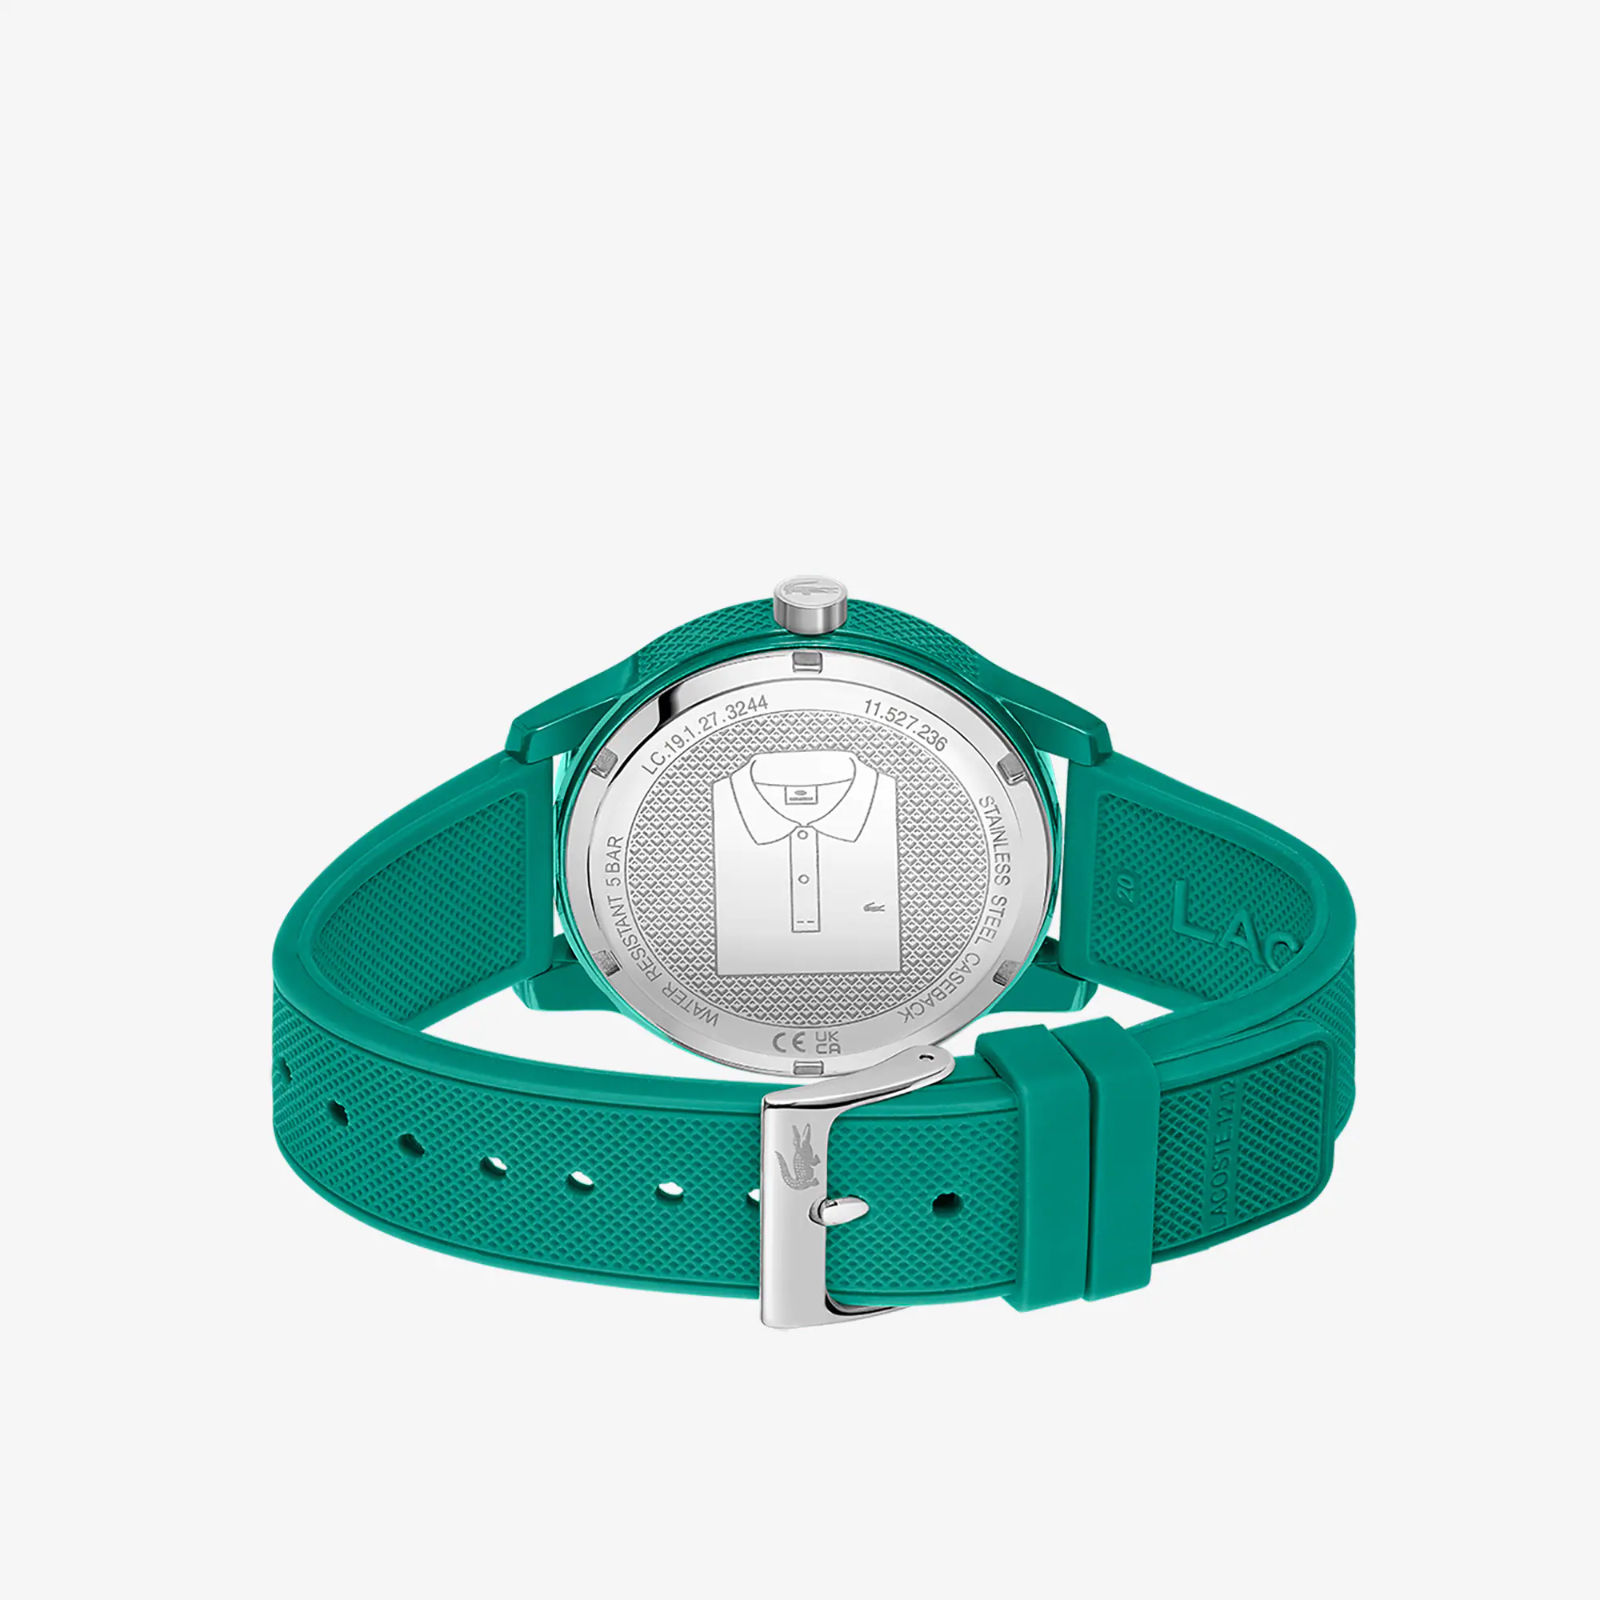 Unisex Lacoste L.12.12 3 Hands Green Silicone Watch 2011192